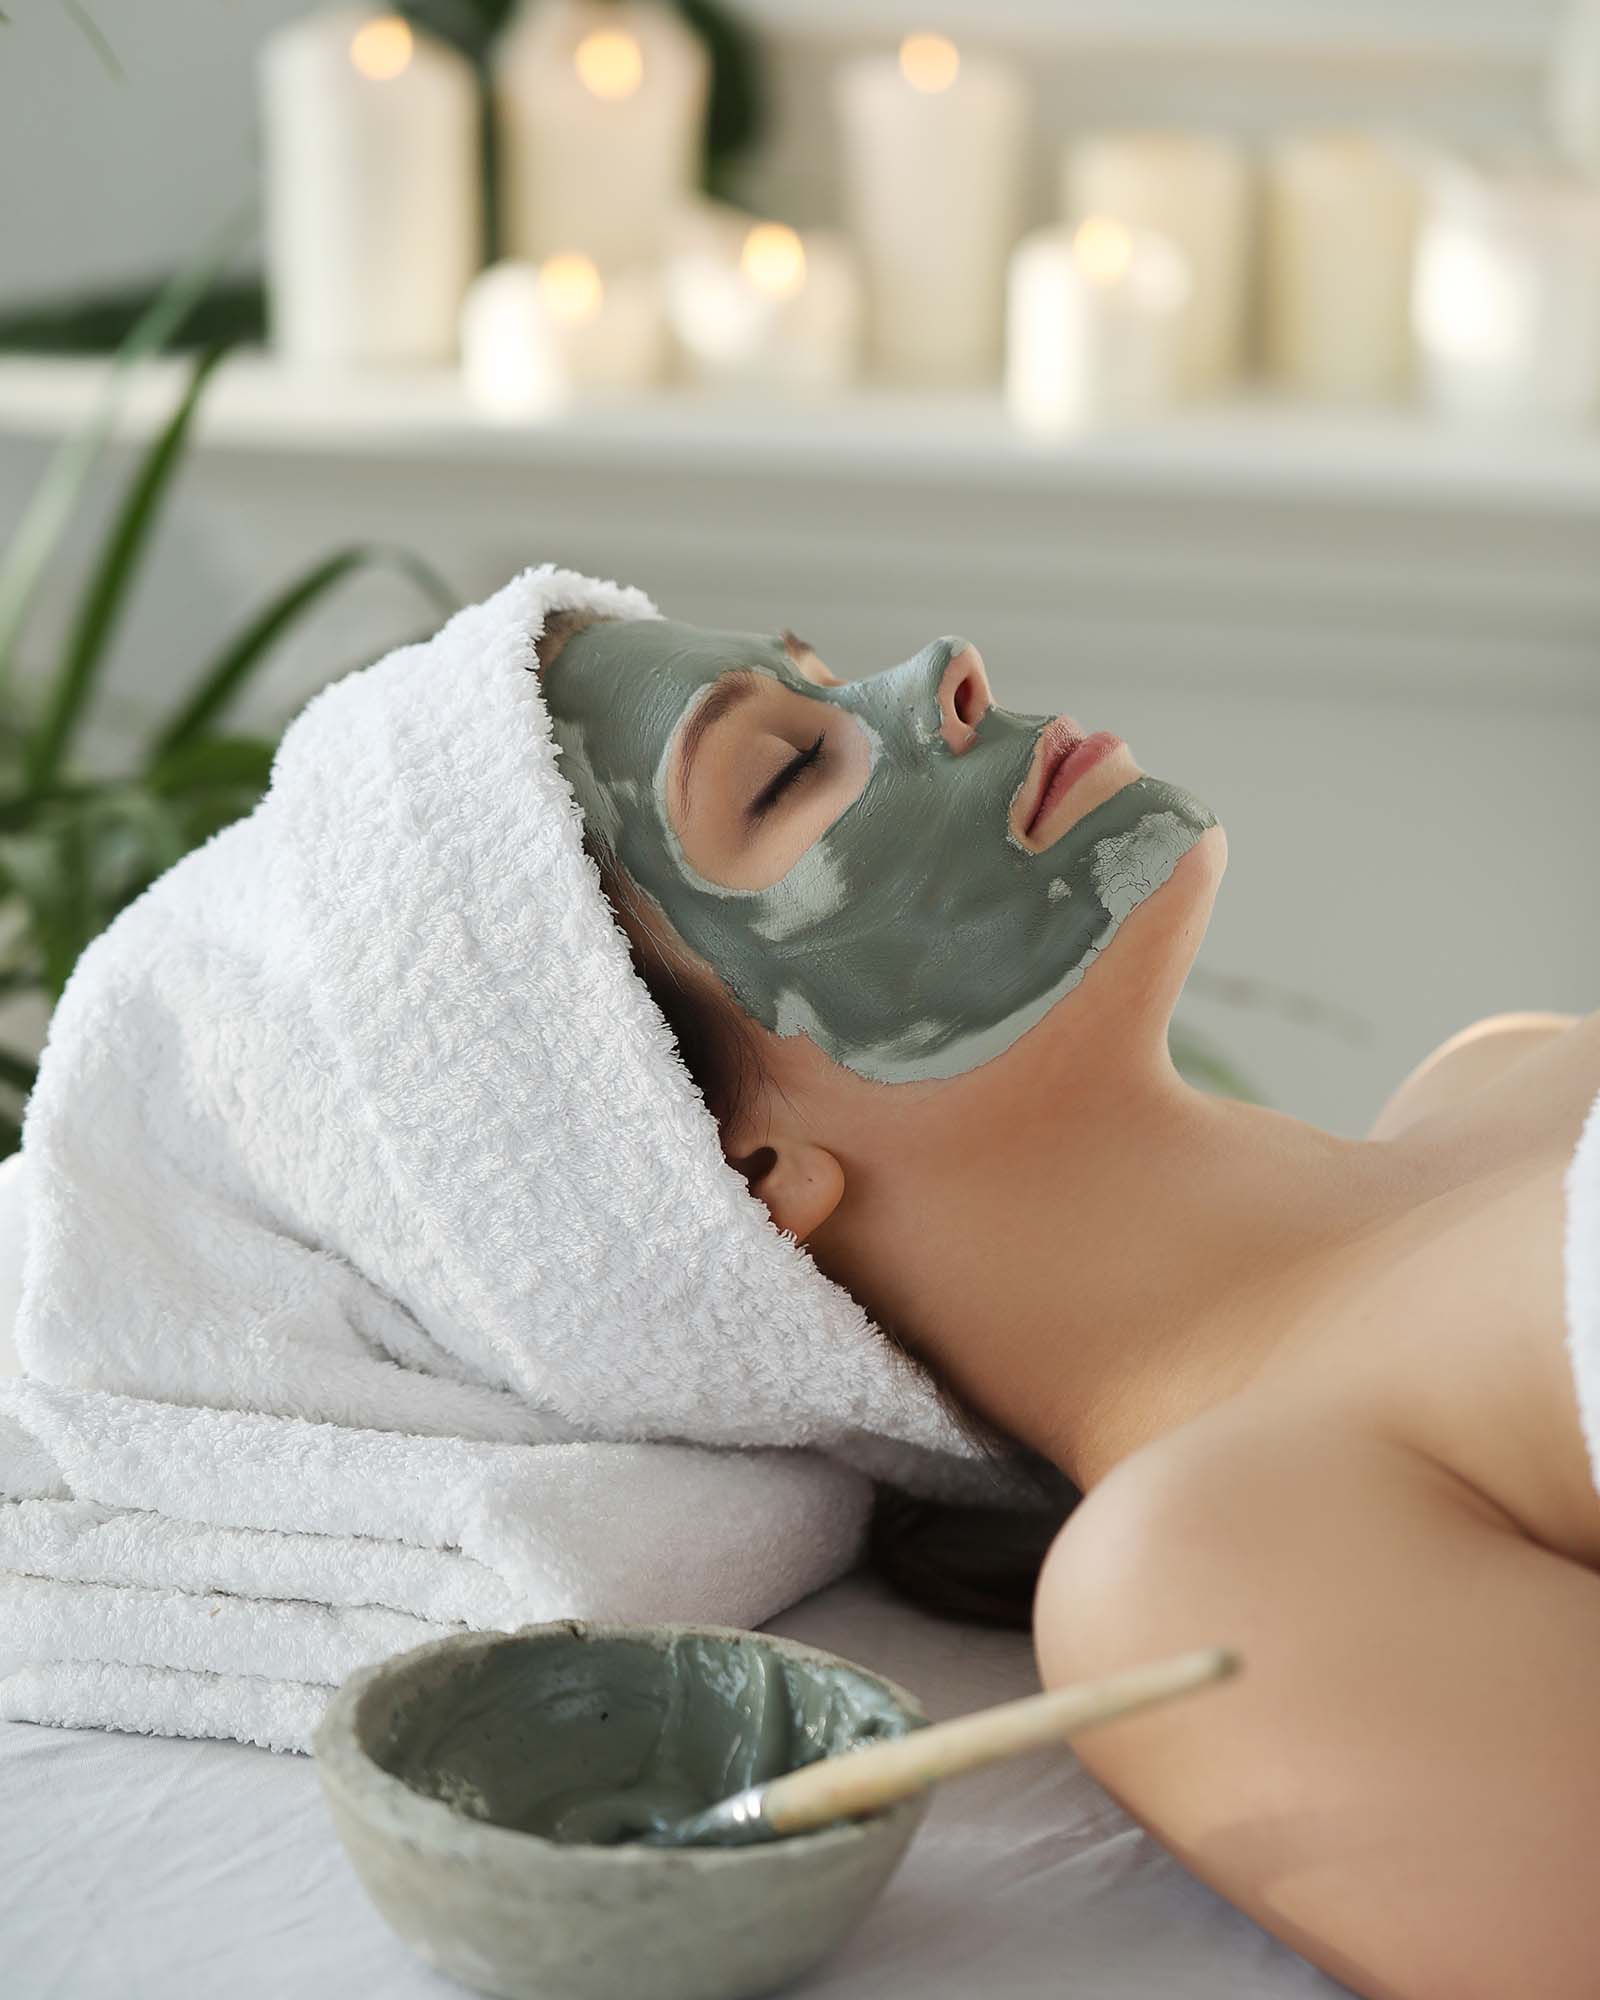 Beauty and healthcare. Woman in spa salon